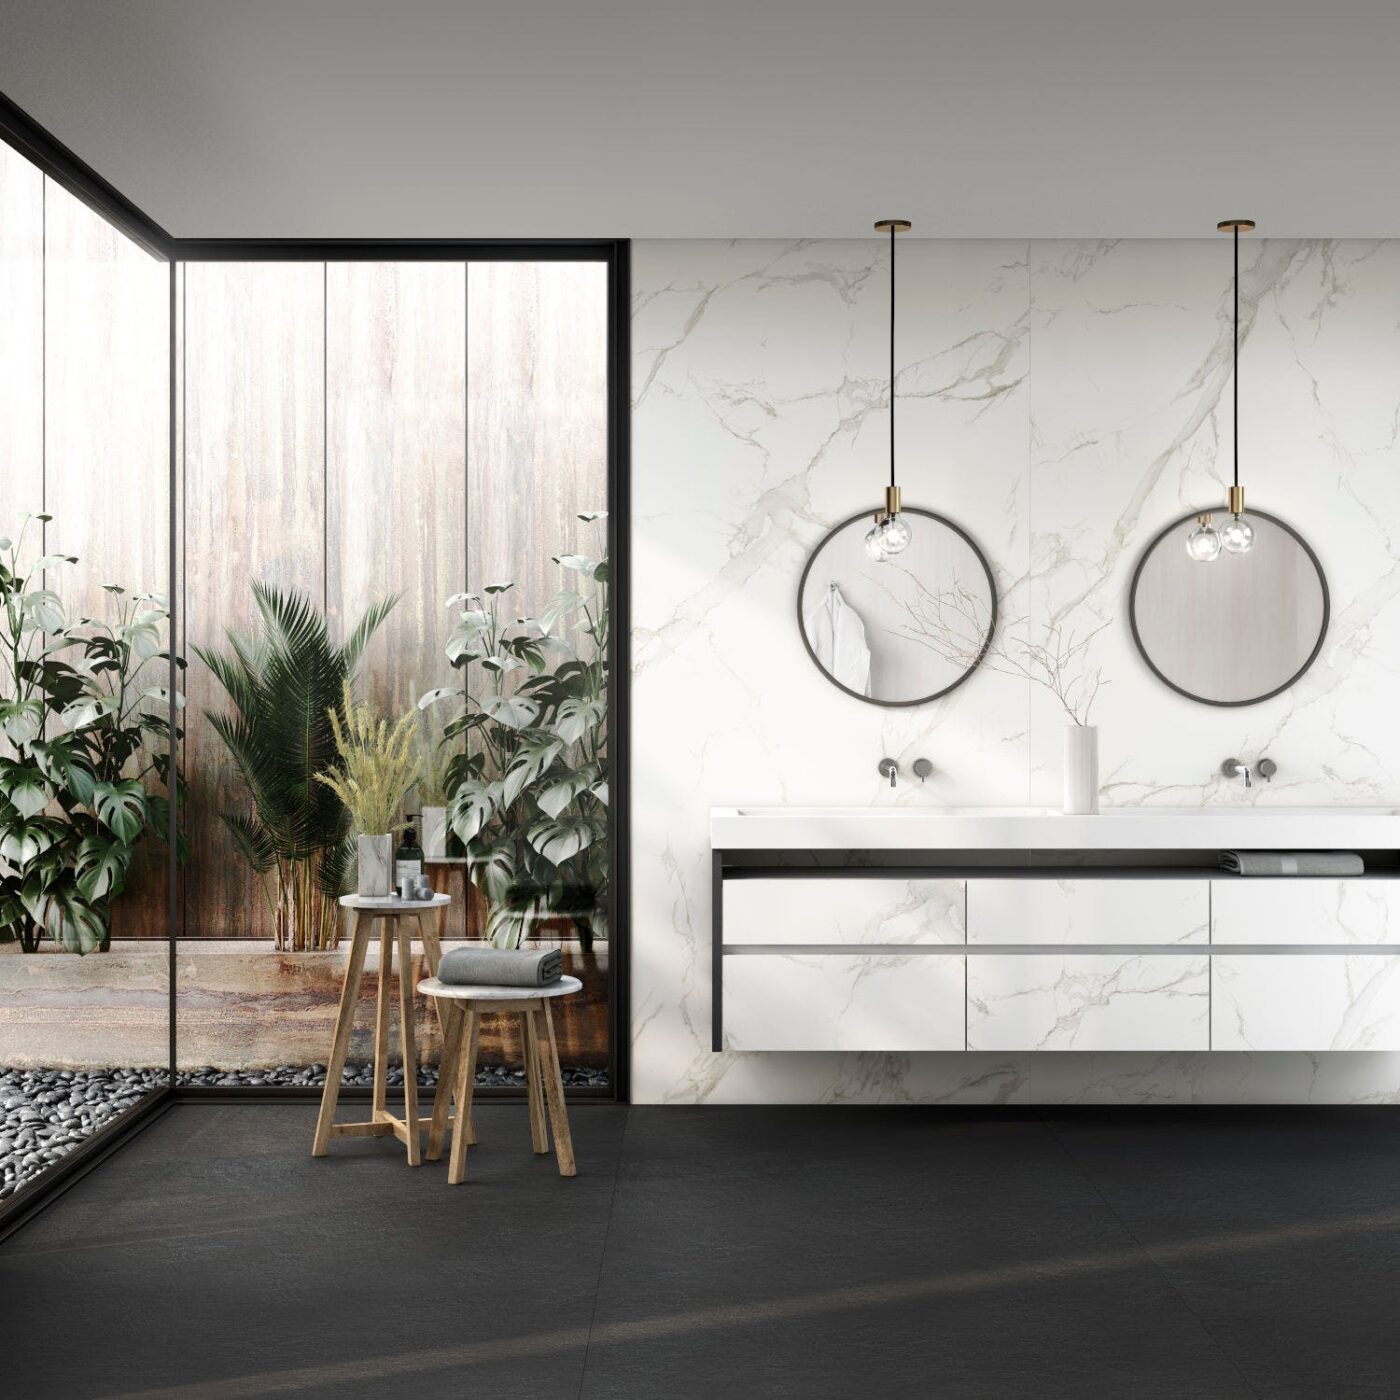 Image of Dekton Bathroom Aura 15 1 in Spring at home: let’s make the most of it! - Cosentino